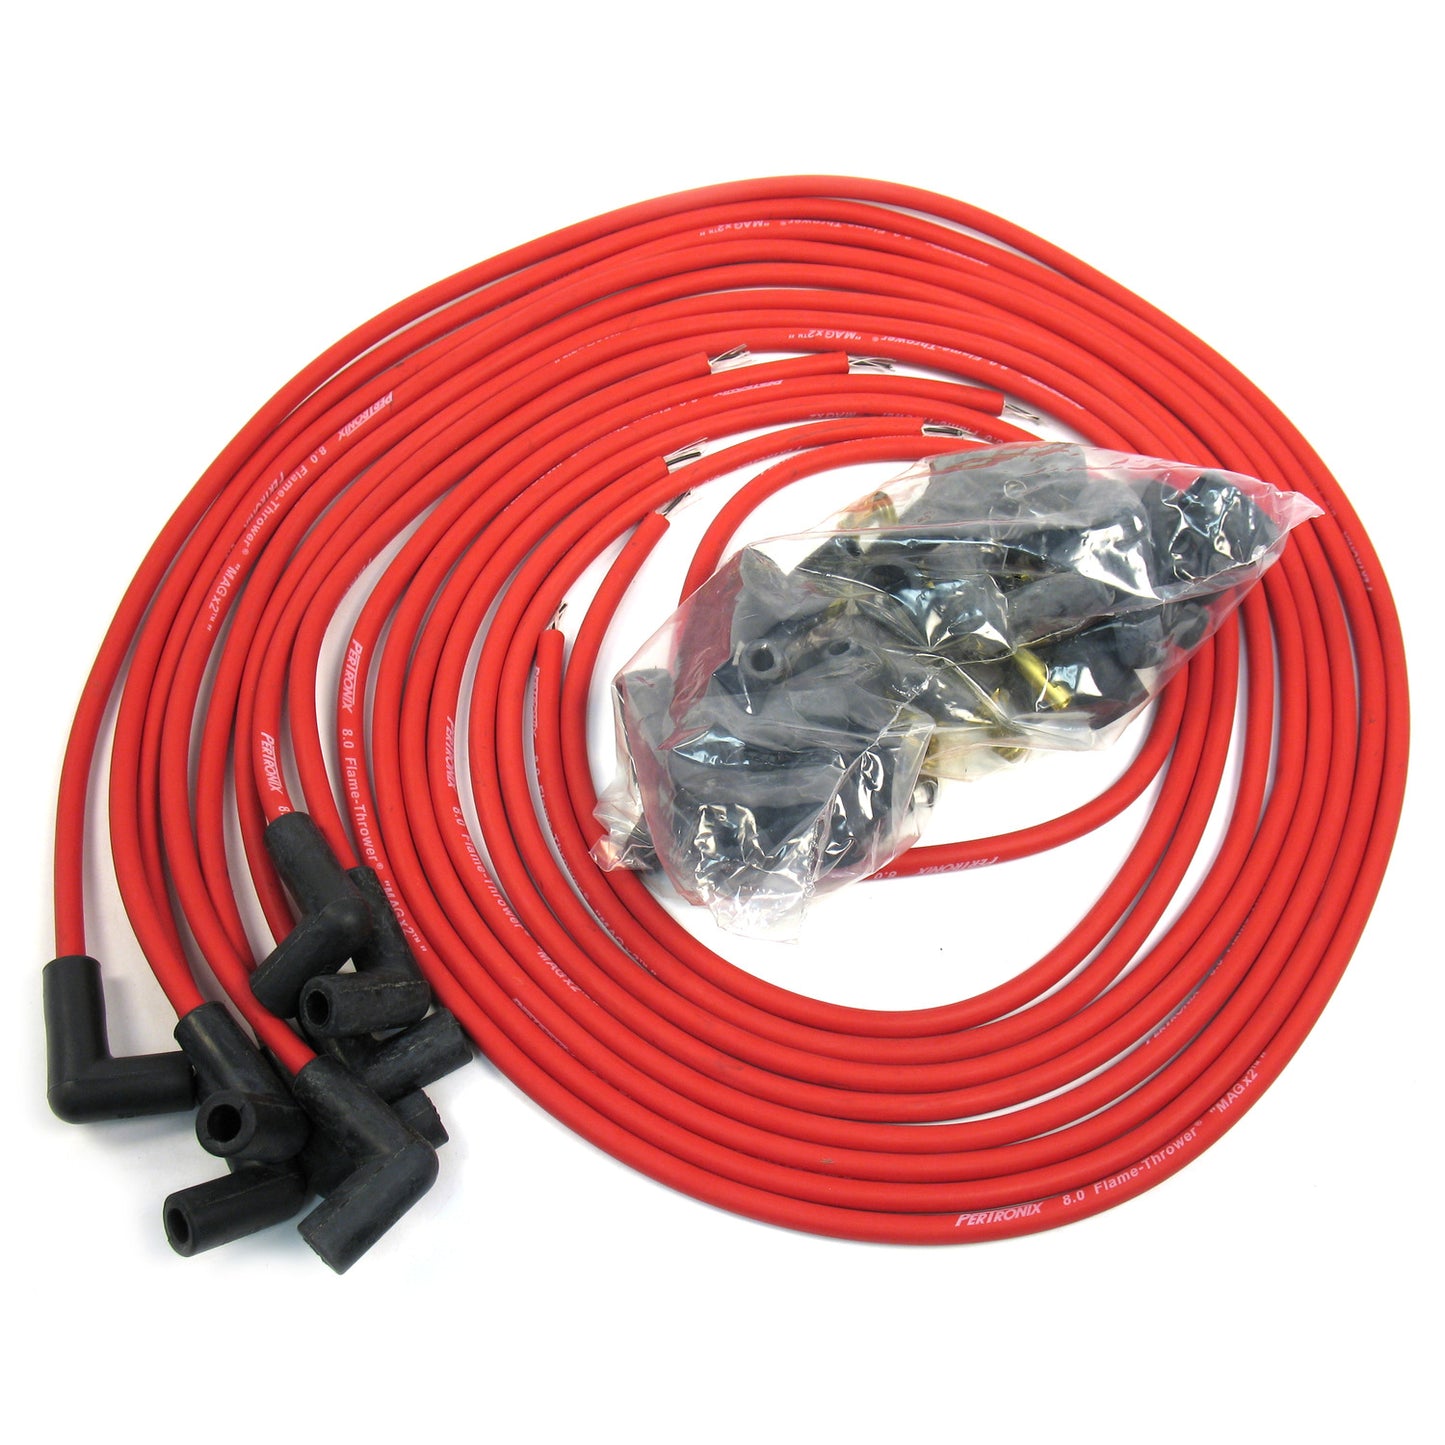 PerTronix 808490 Flame-Thrower Spark Plug Wires 8 cyl 8mm Universal 90 Degree Red